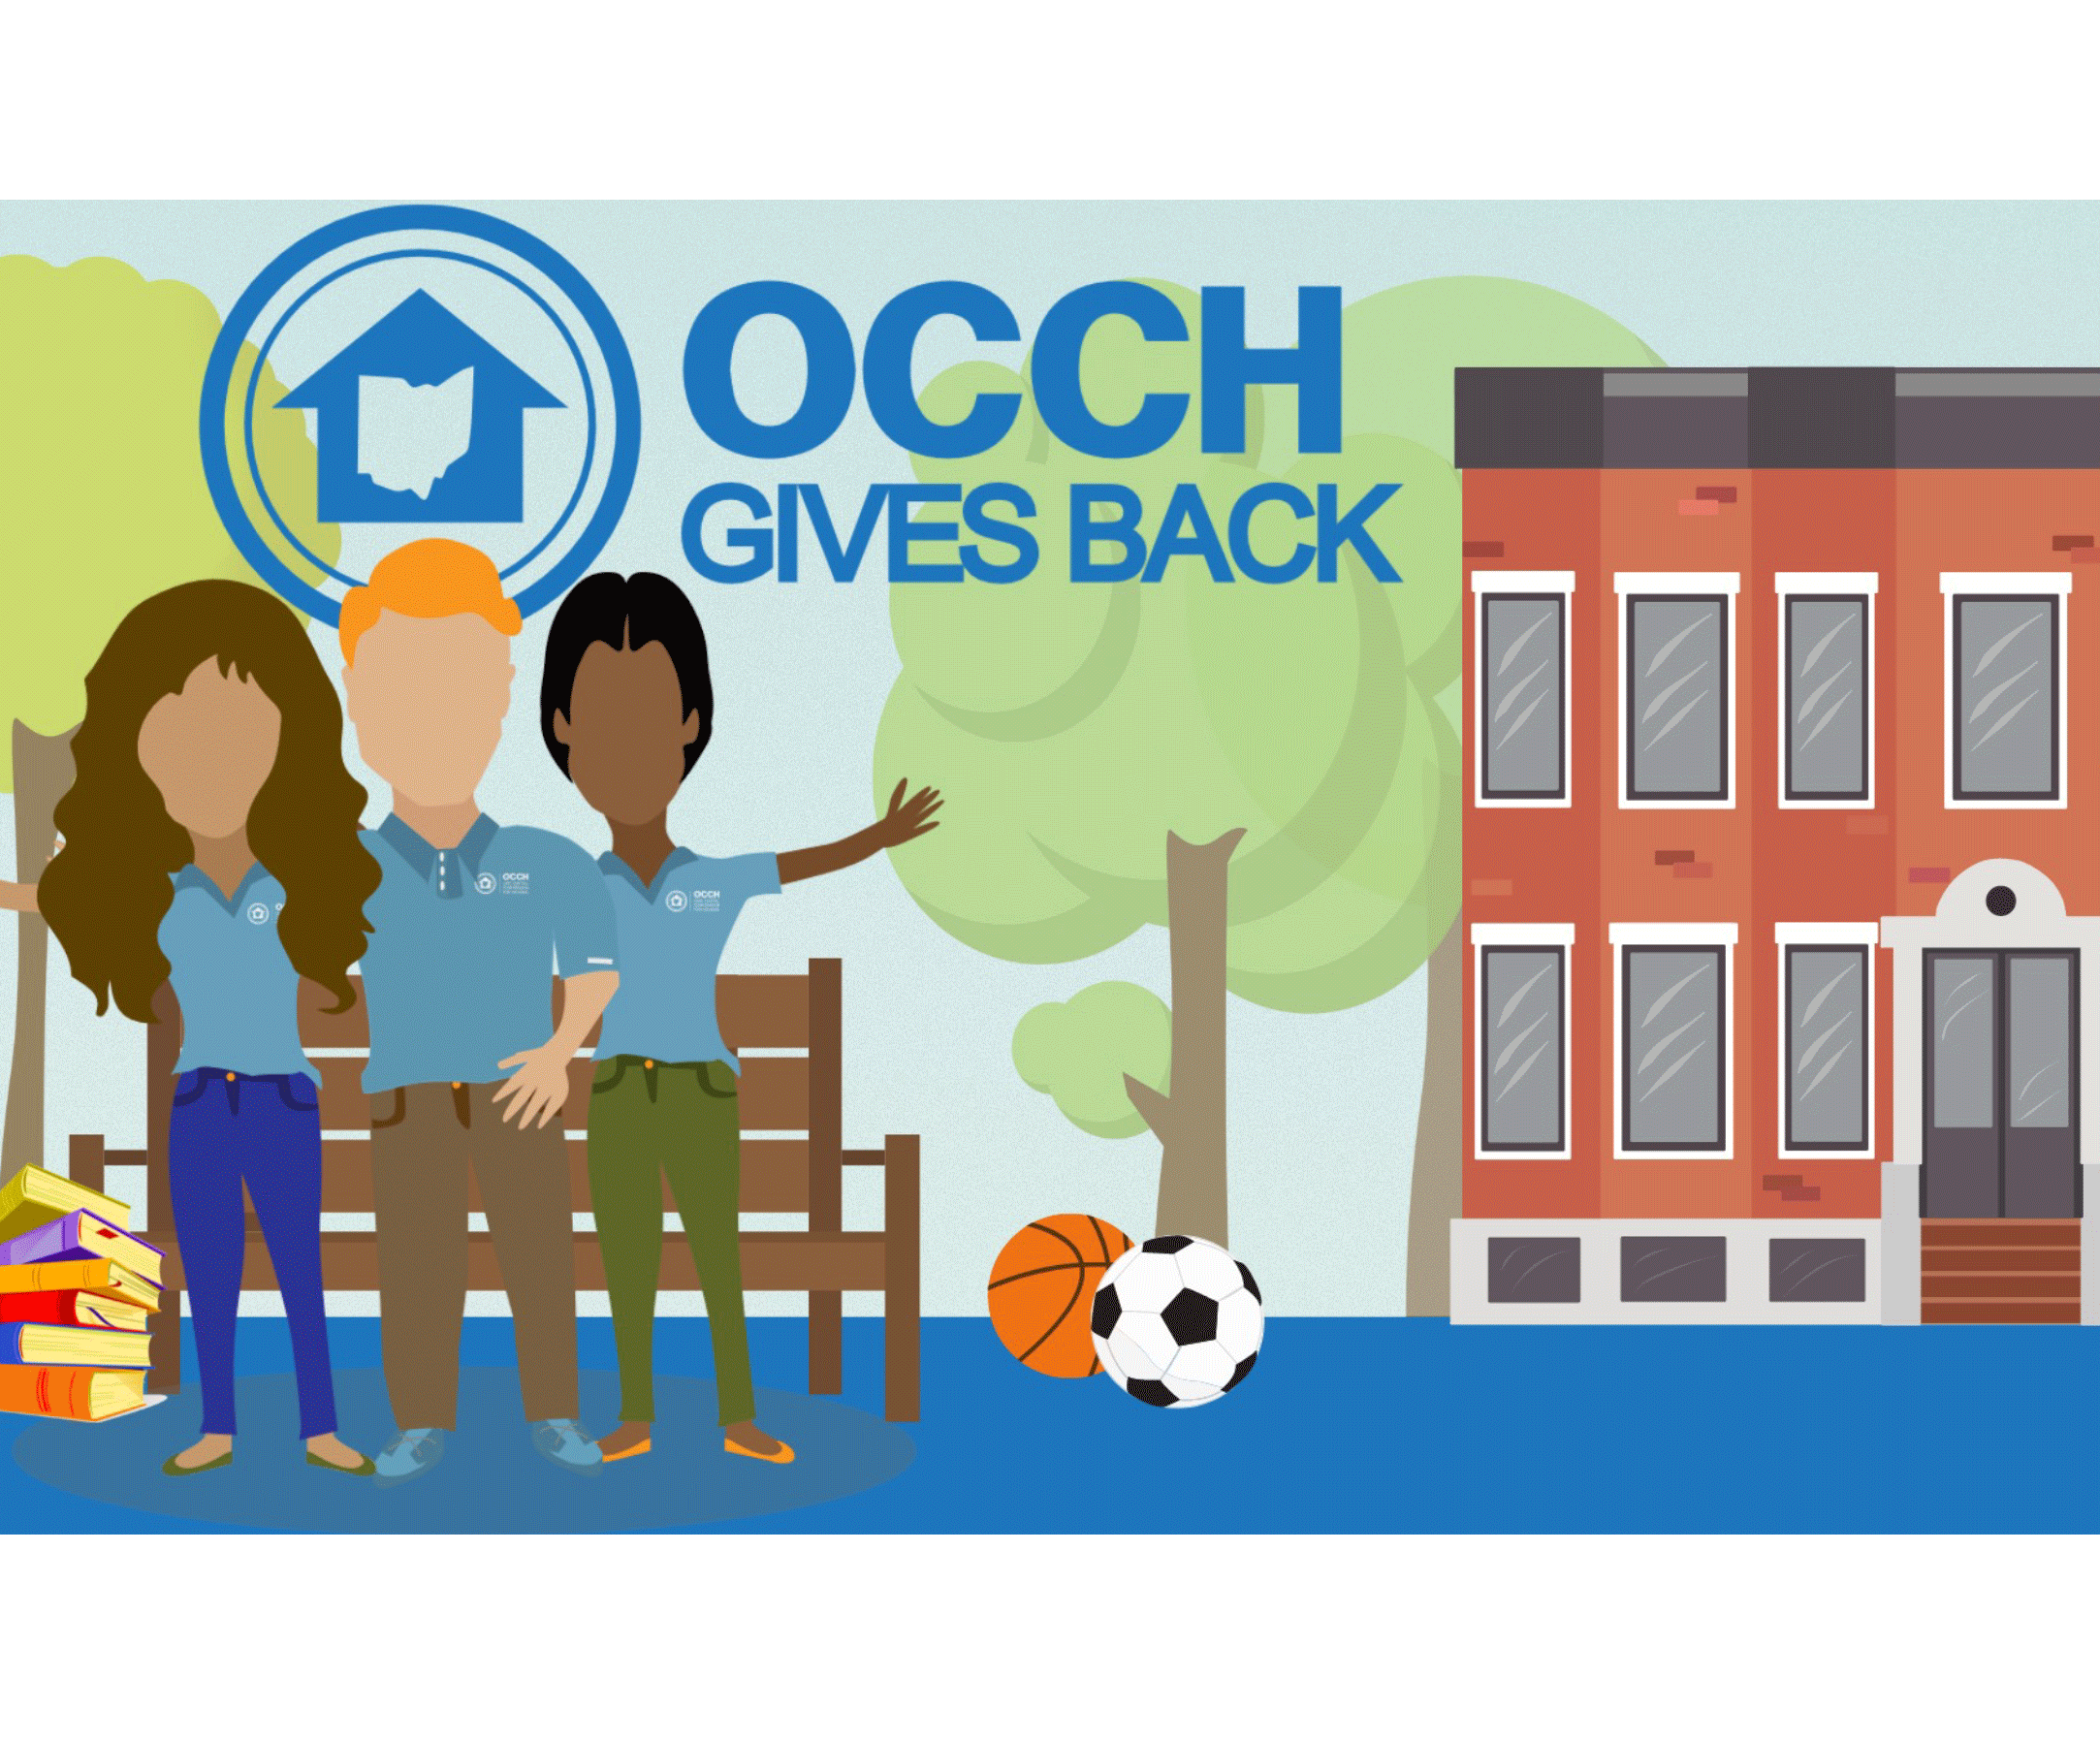 OCCH Give Back